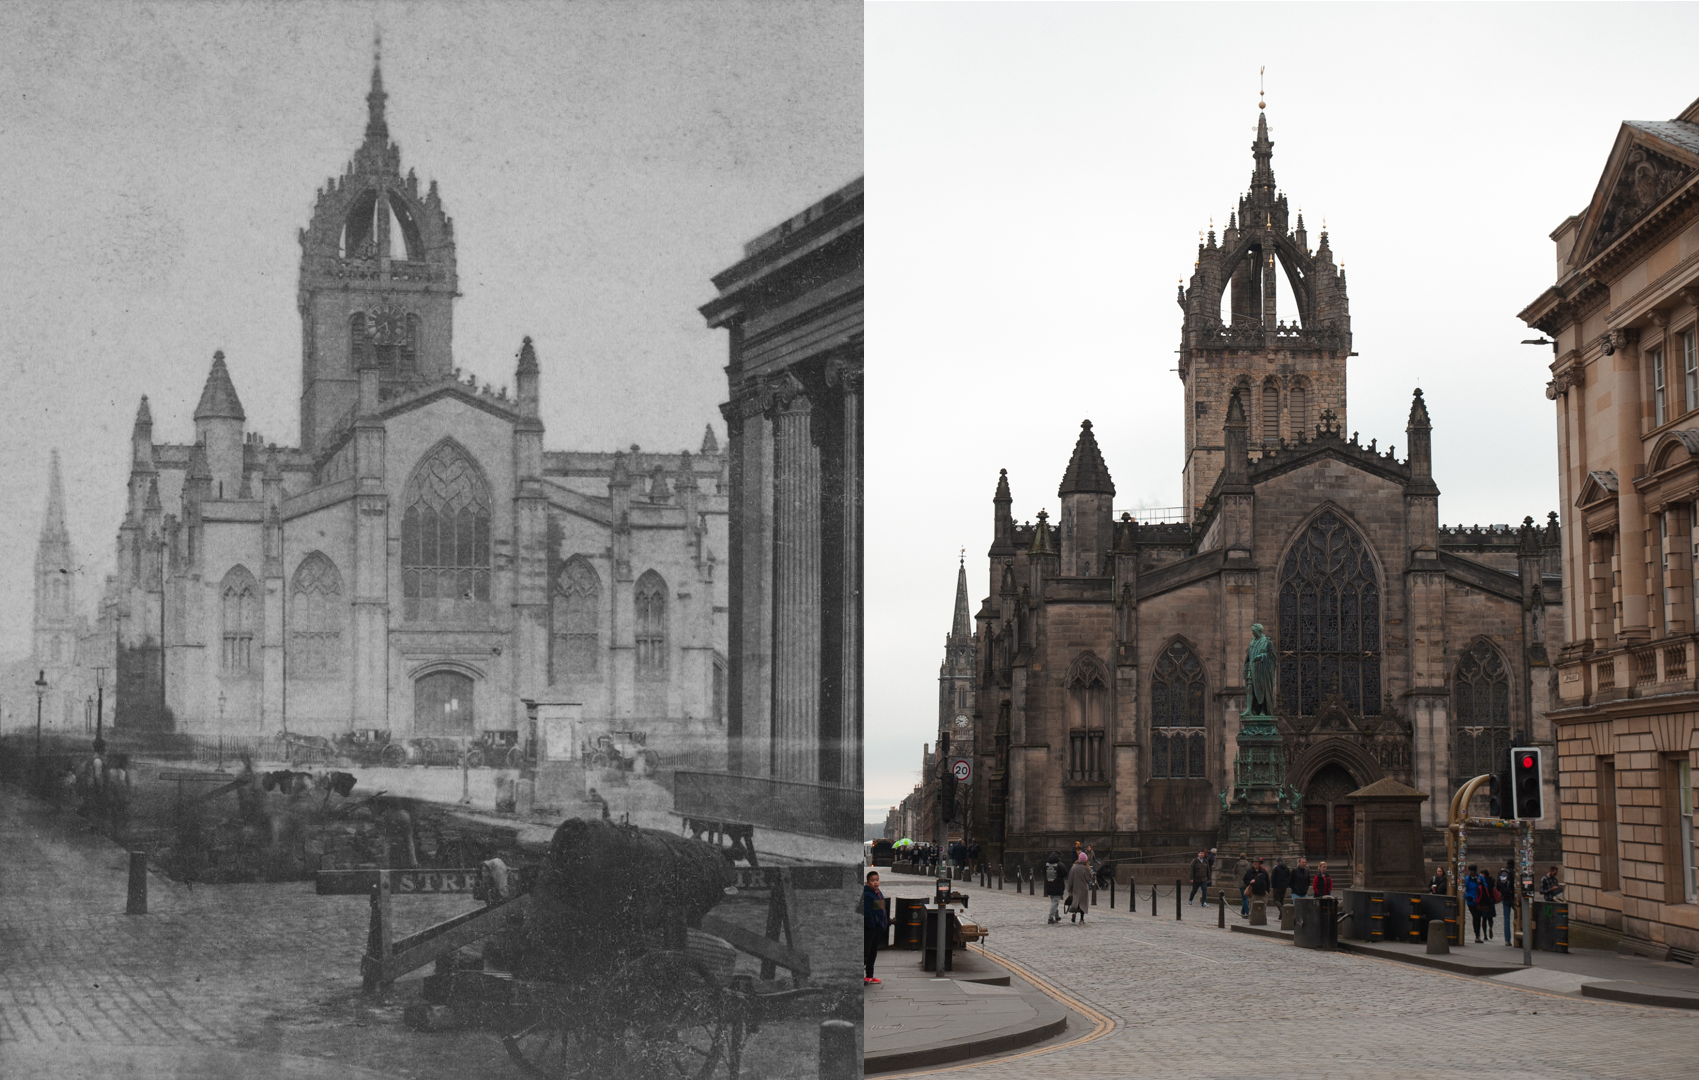 St Giles Cathedral in 1860s versus today